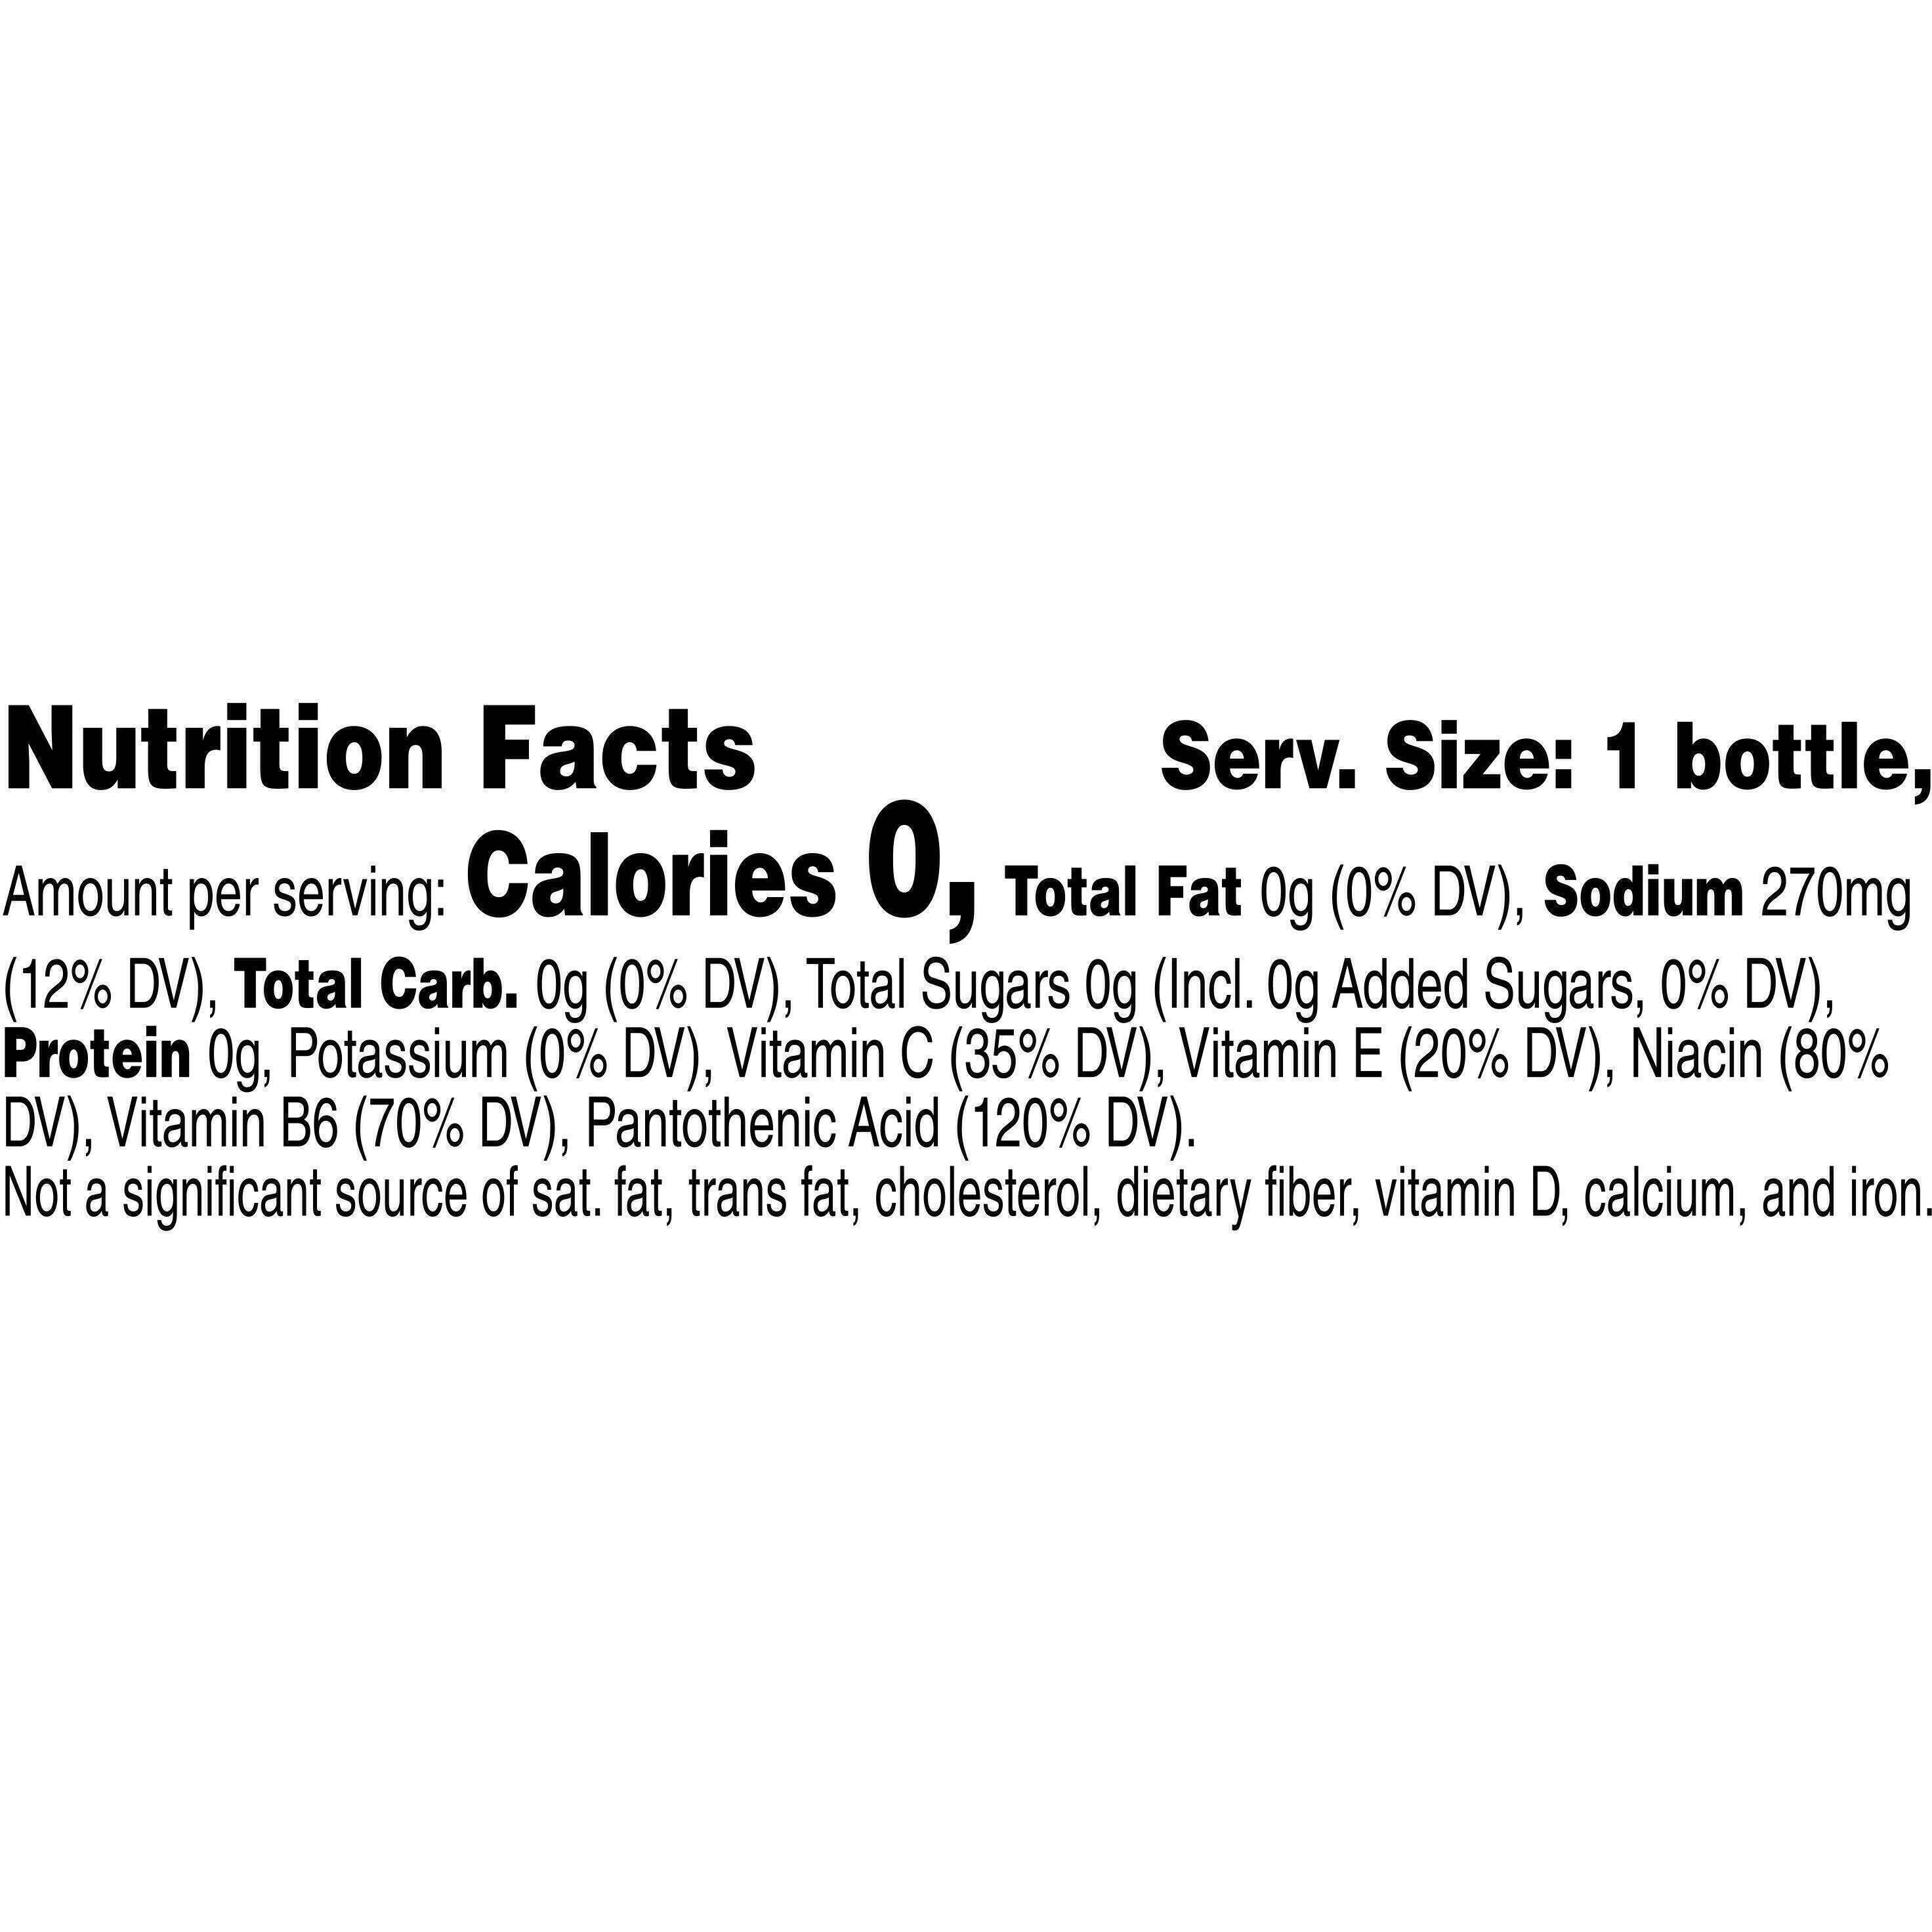 Image describing nutrition information for product Propel Kiwi Strawberry